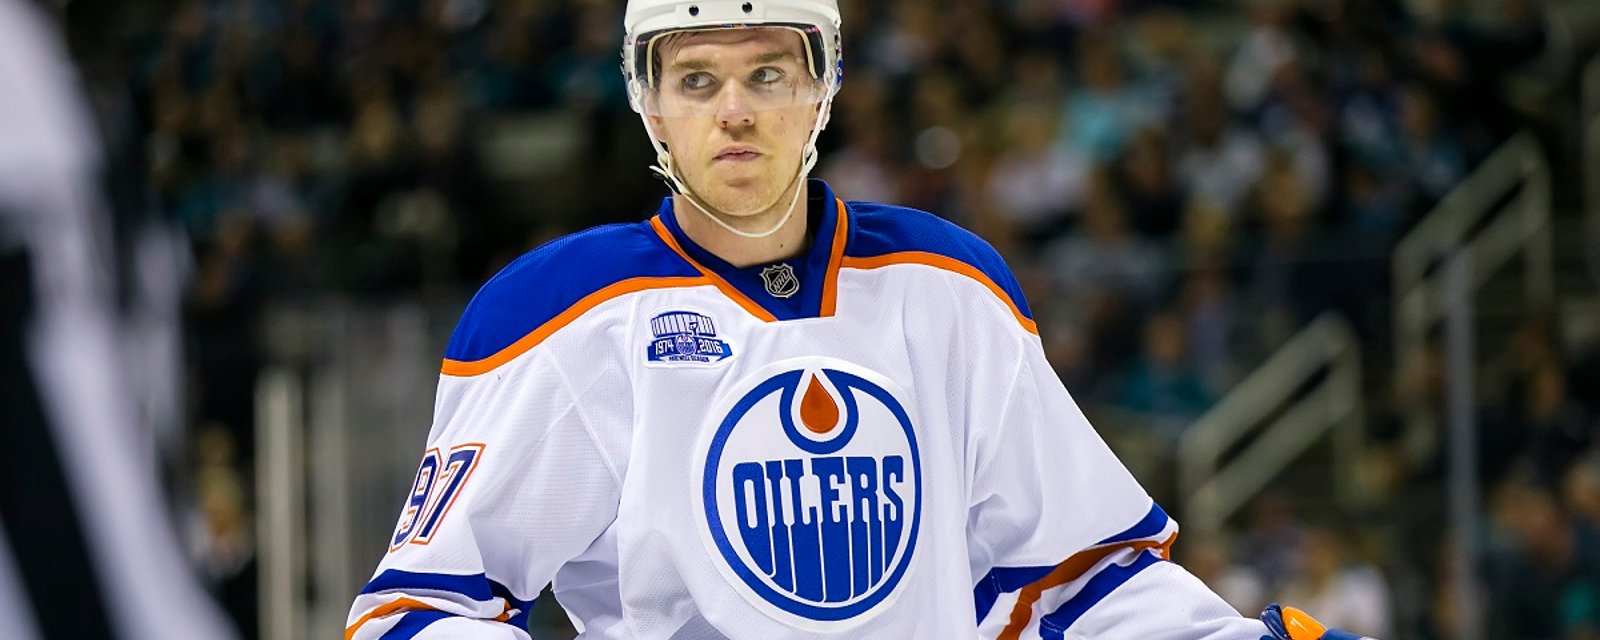 Connor McDavid says a rival player intentionally injured him.